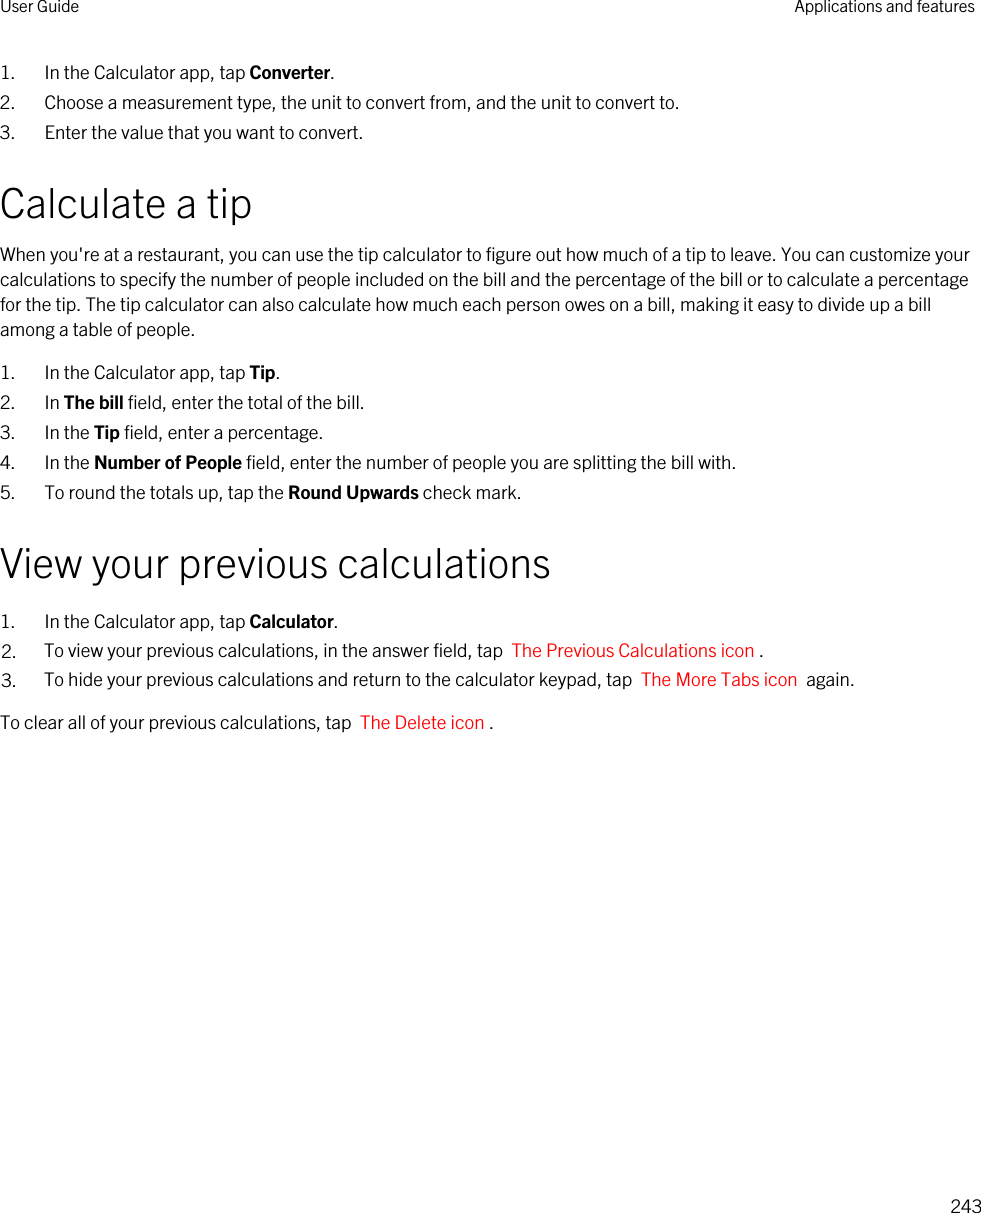 1. In the Calculator app, tap Converter.2. Choose a measurement type, the unit to convert from, and the unit to convert to.3. Enter the value that you want to convert.Calculate a tipWhen you&apos;re at a restaurant, you can use the tip calculator to figure out how much of a tip to leave. You can customize your calculations to specify the number of people included on the bill and the percentage of the bill or to calculate a percentage for the tip. The tip calculator can also calculate how much each person owes on a bill, making it easy to divide up a bill among a table of people.1. In the Calculator app, tap Tip.2. In The bill field, enter the total of the bill.3. In the Tip field, enter a percentage.4. In the Number of People field, enter the number of people you are splitting the bill with.5. To round the totals up, tap the Round Upwards check mark.View your previous calculations1. In the Calculator app, tap Calculator.2. To view your previous calculations, in the answer field, tap  The Previous Calculations icon .3. To hide your previous calculations and return to the calculator keypad, tap  The More Tabs icon  again.To clear all of your previous calculations, tap  The Delete icon .User Guide Applications and features243